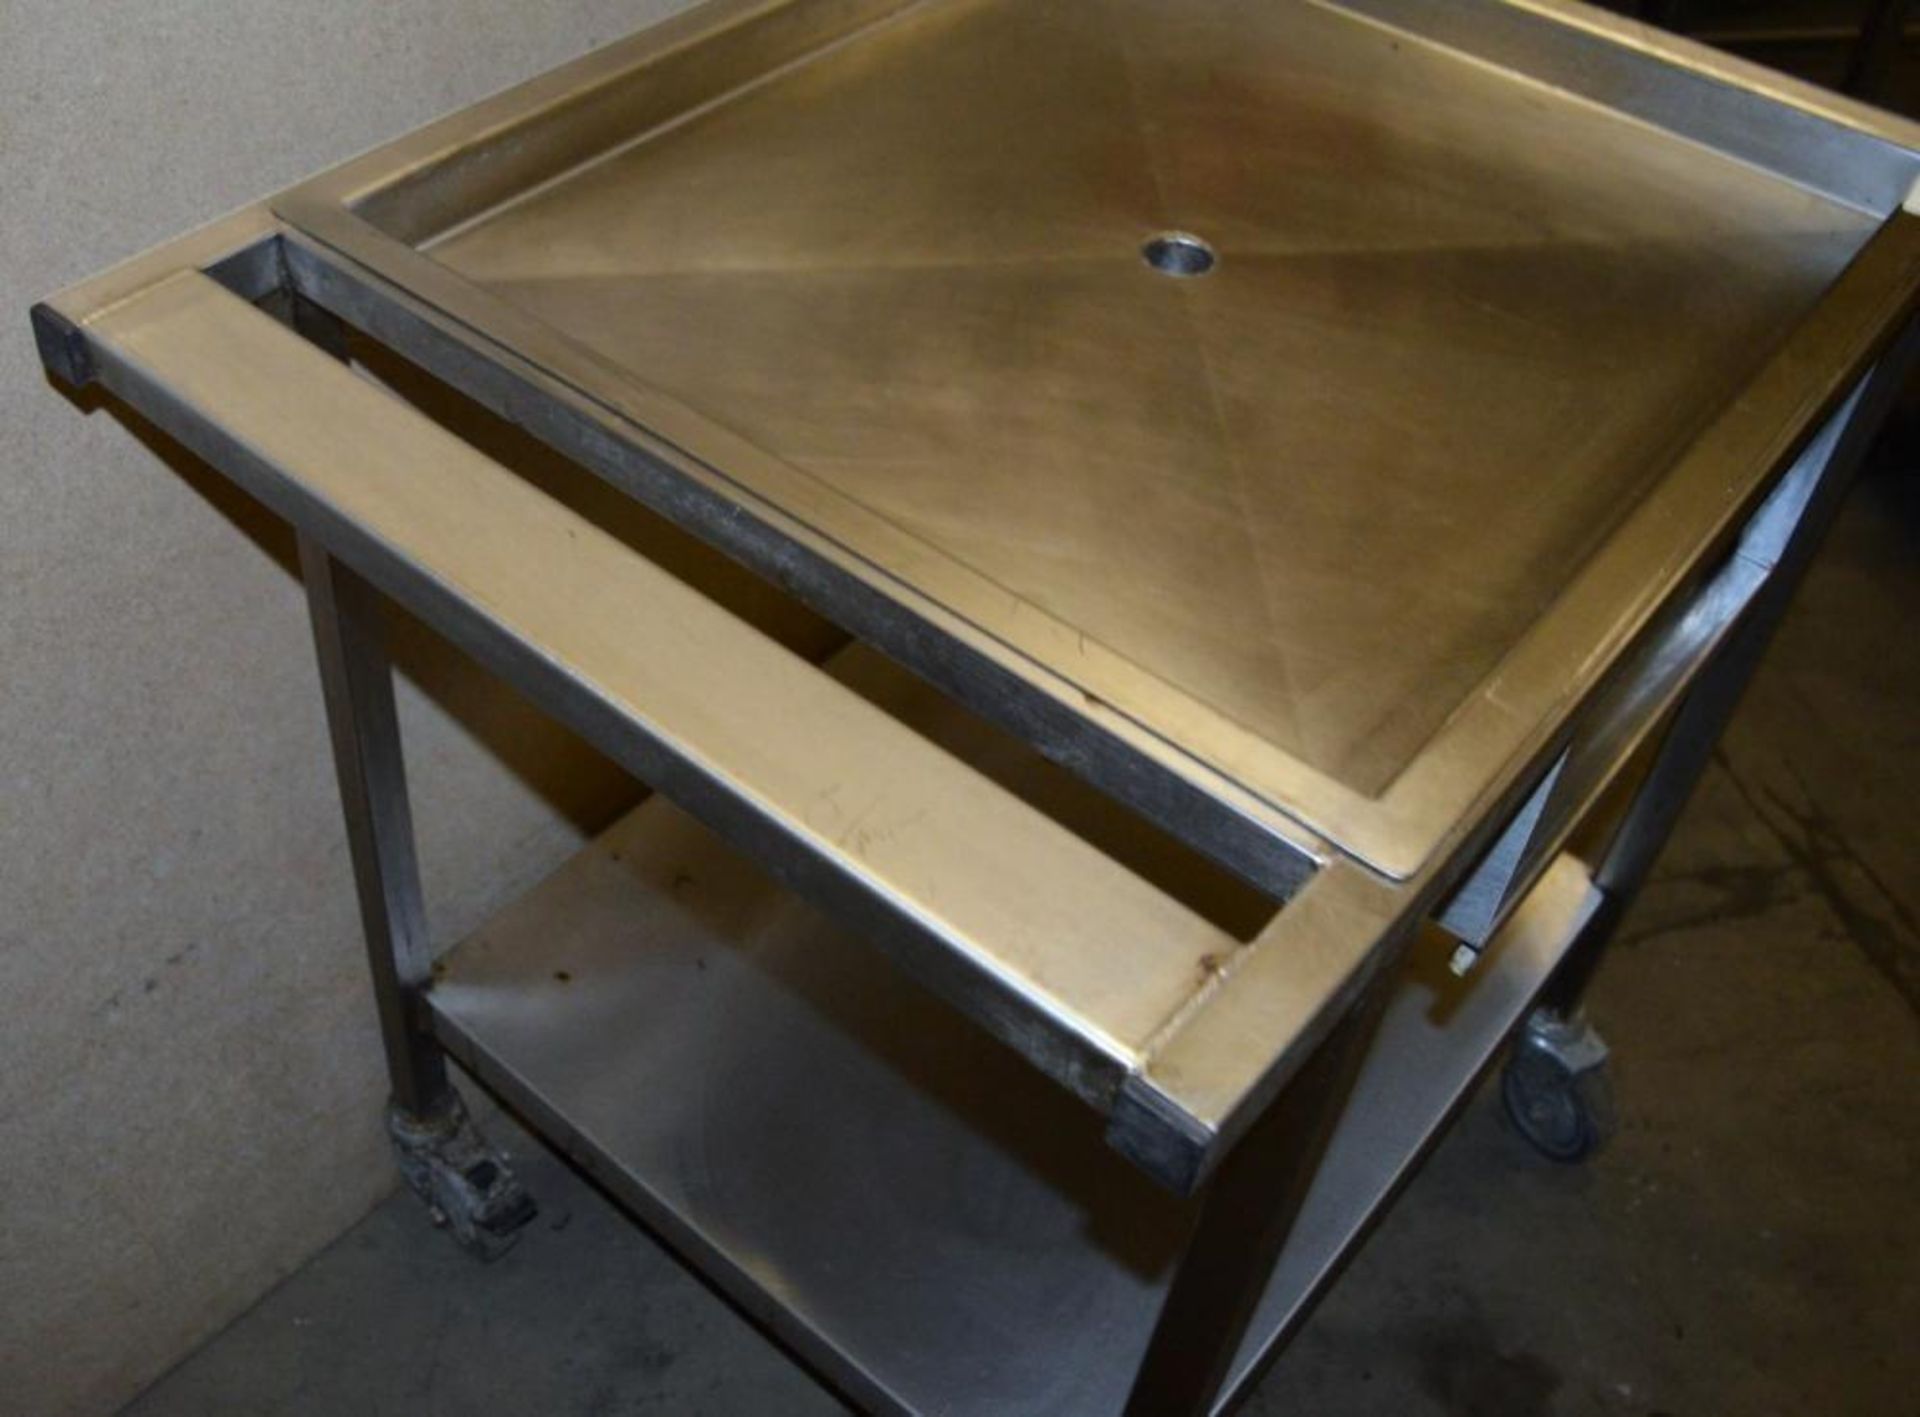 1 x Wheeled Stainless Steel Prep Bench with Drain Hole - Dimensions: 81.5 x 60.5 x 88cm - Ref: J1002 - Image 2 of 4